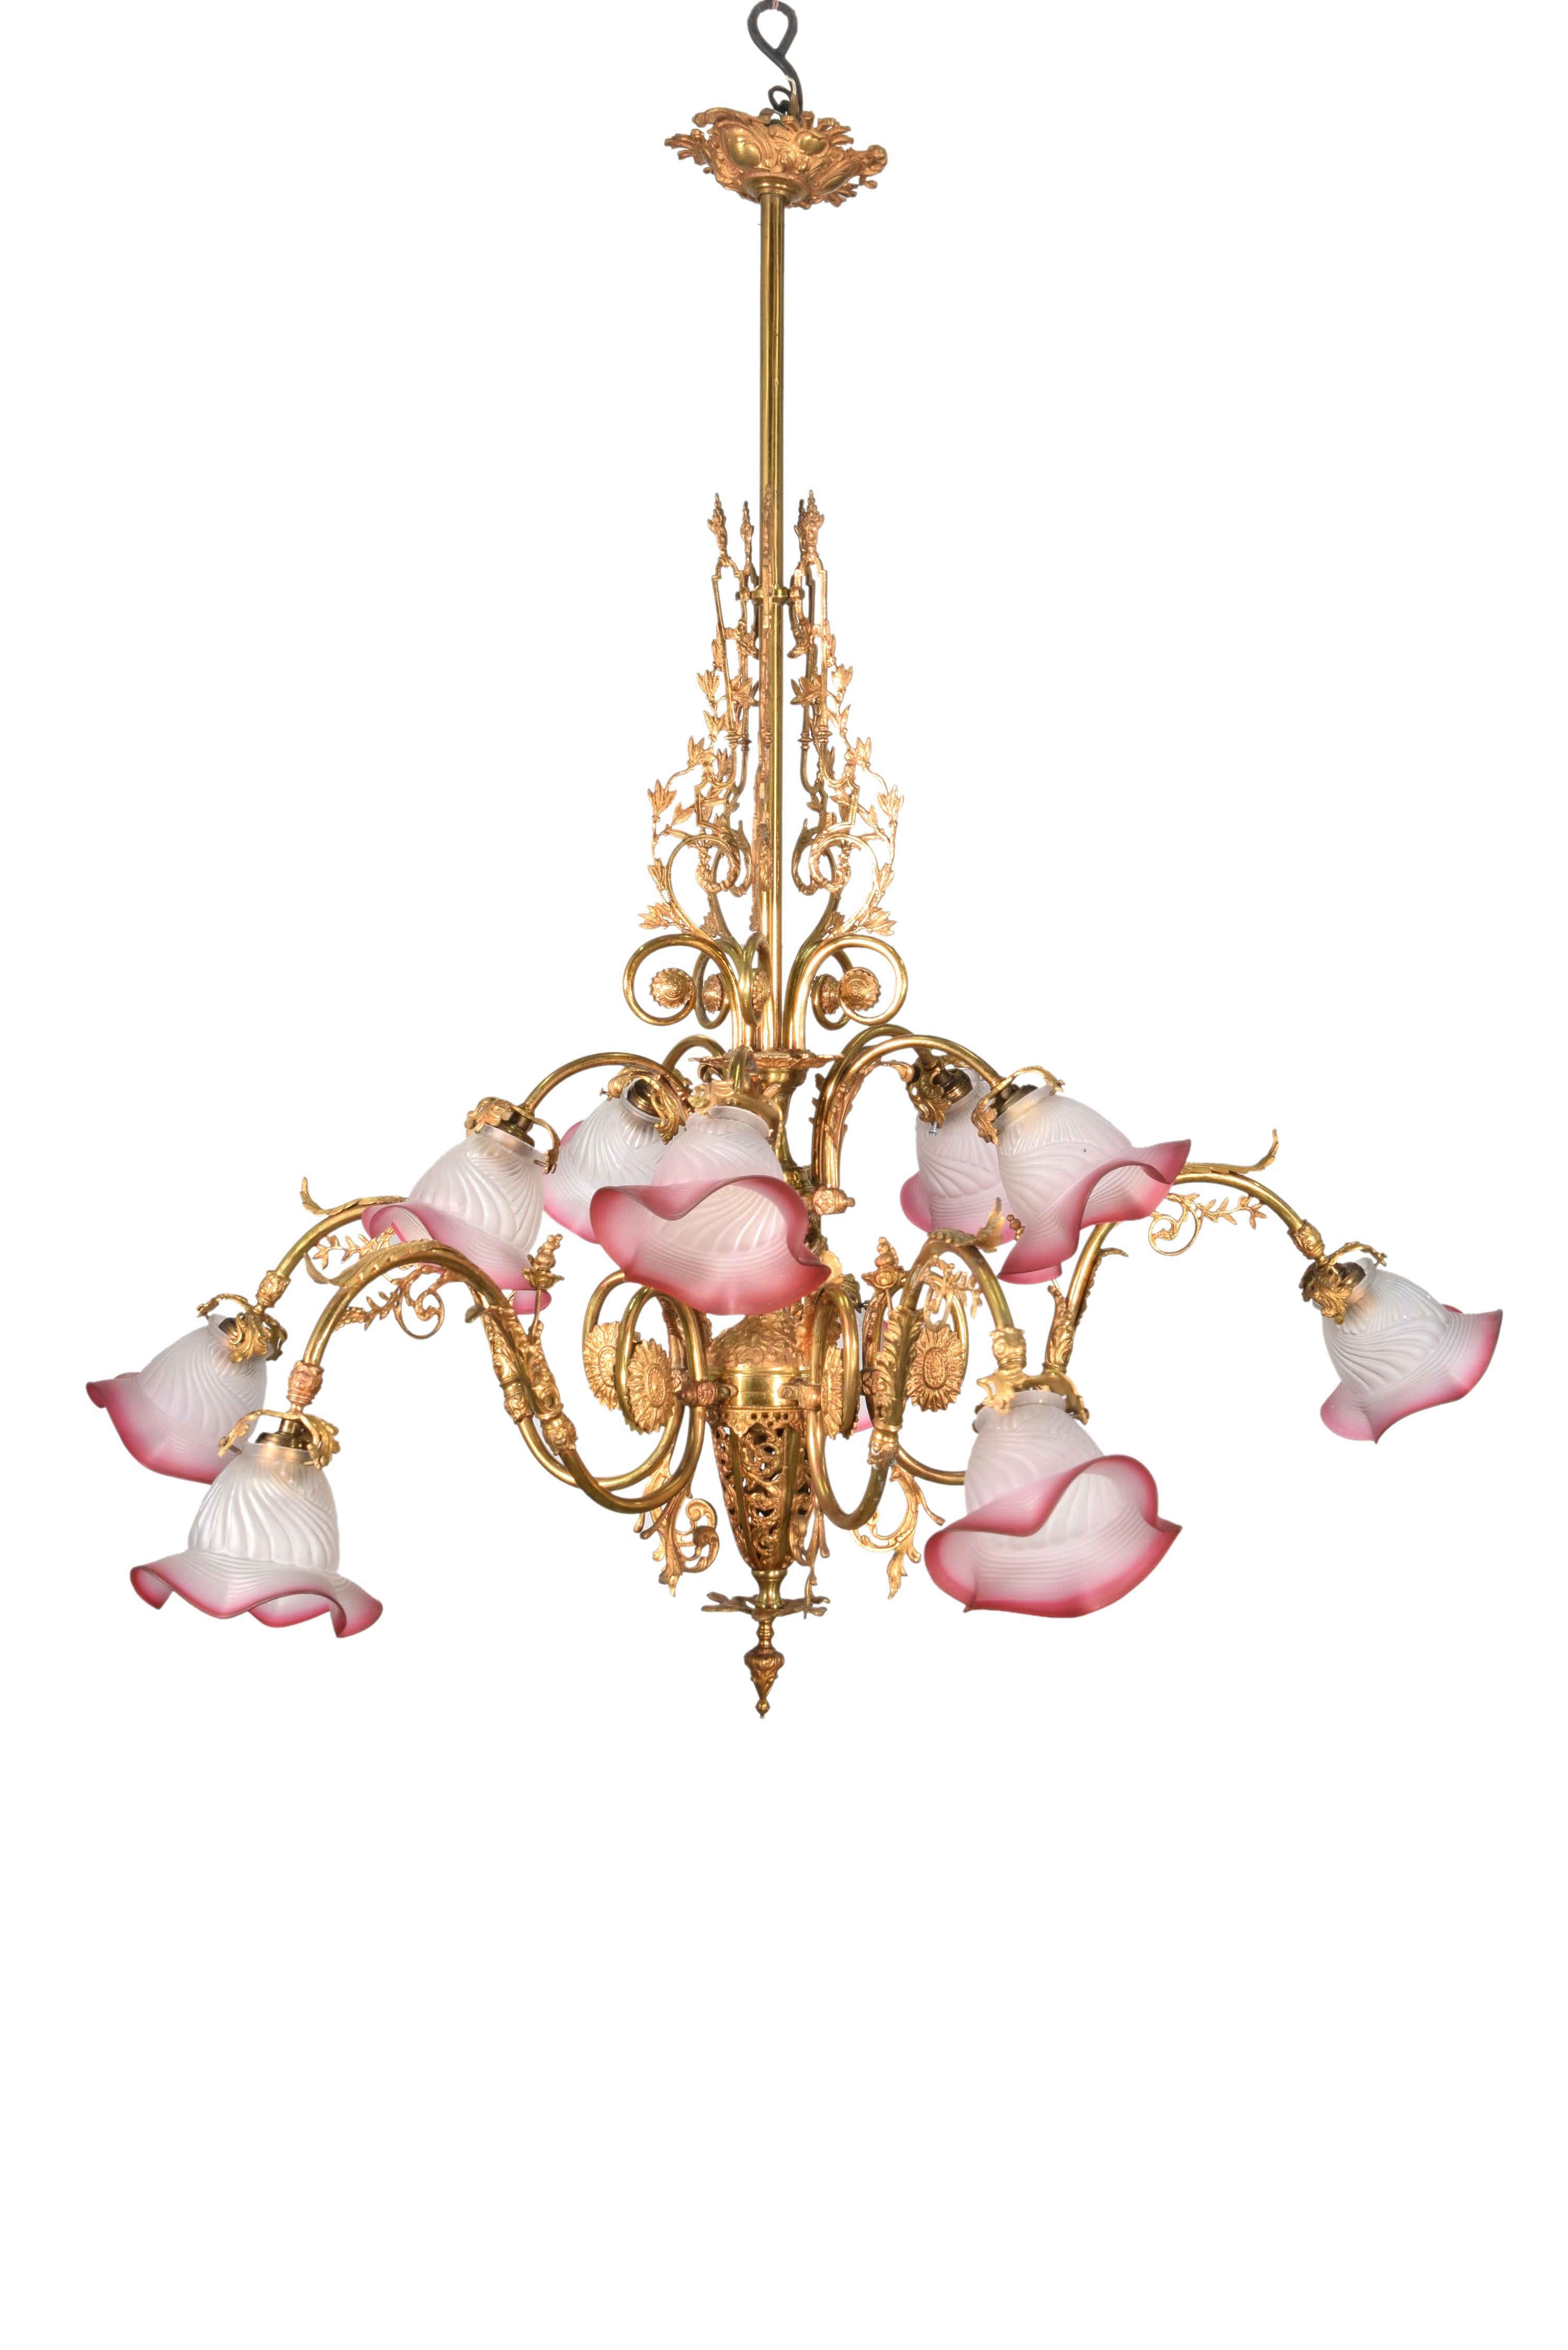 Lamp. Bronze, glass, early 20th century.
Requires cleaning and restoration.
Ceiling lamp consisting of an axis from which emerge arms finished in coloured glass tulips resembling flowers and other decorative elements with clear neoclassical